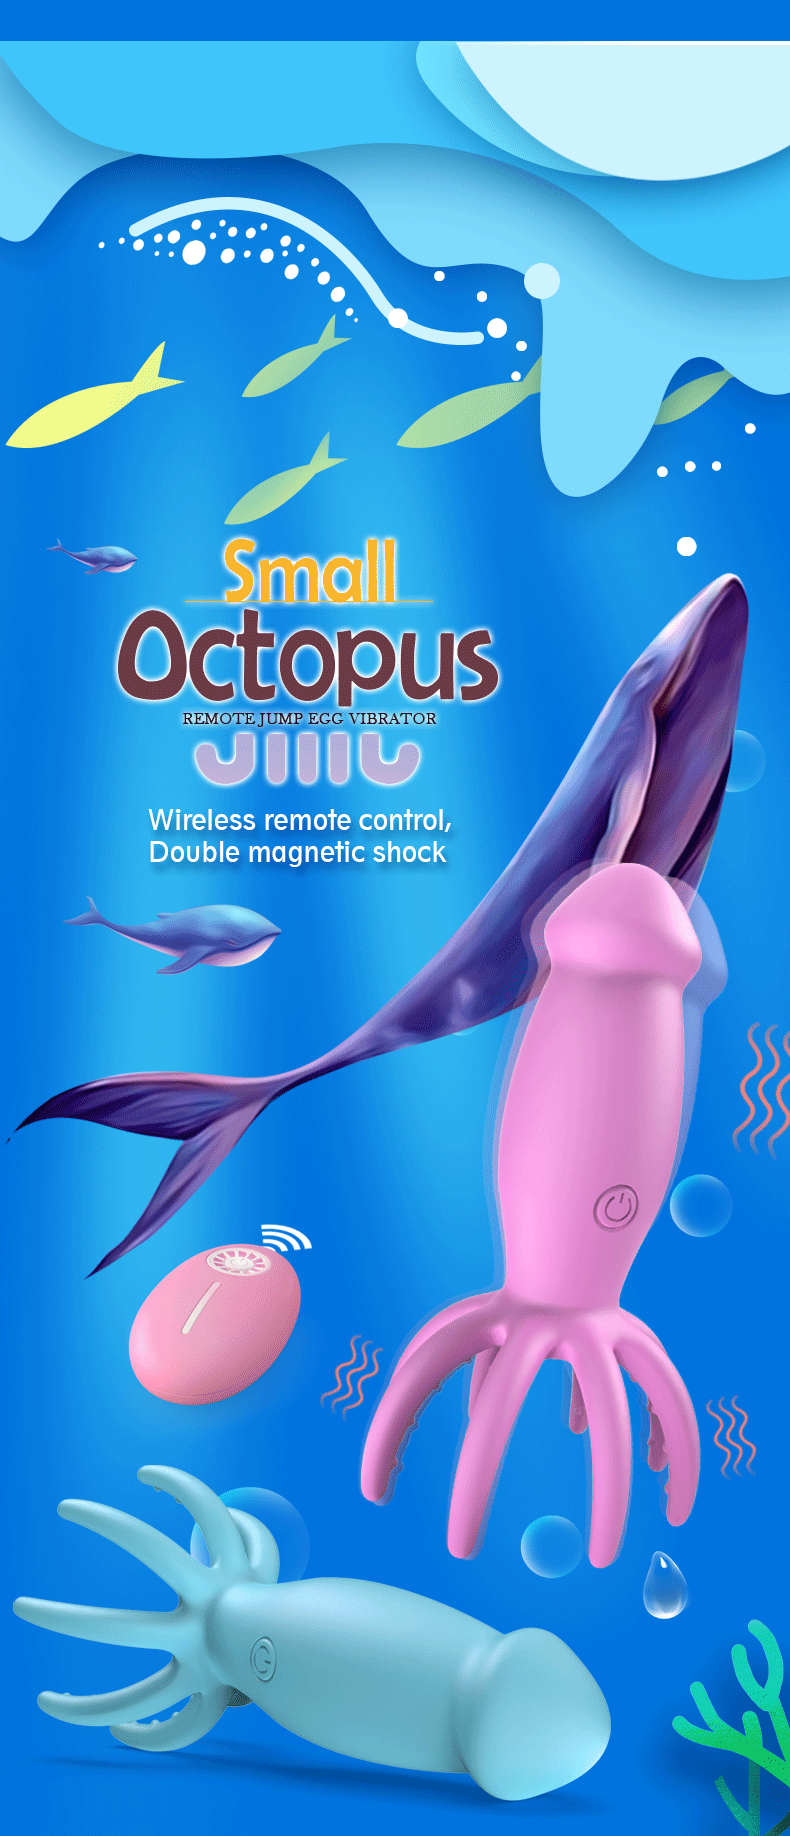 Small Octopus remote jump egg vibrator 10 frequency vibration for women (1)